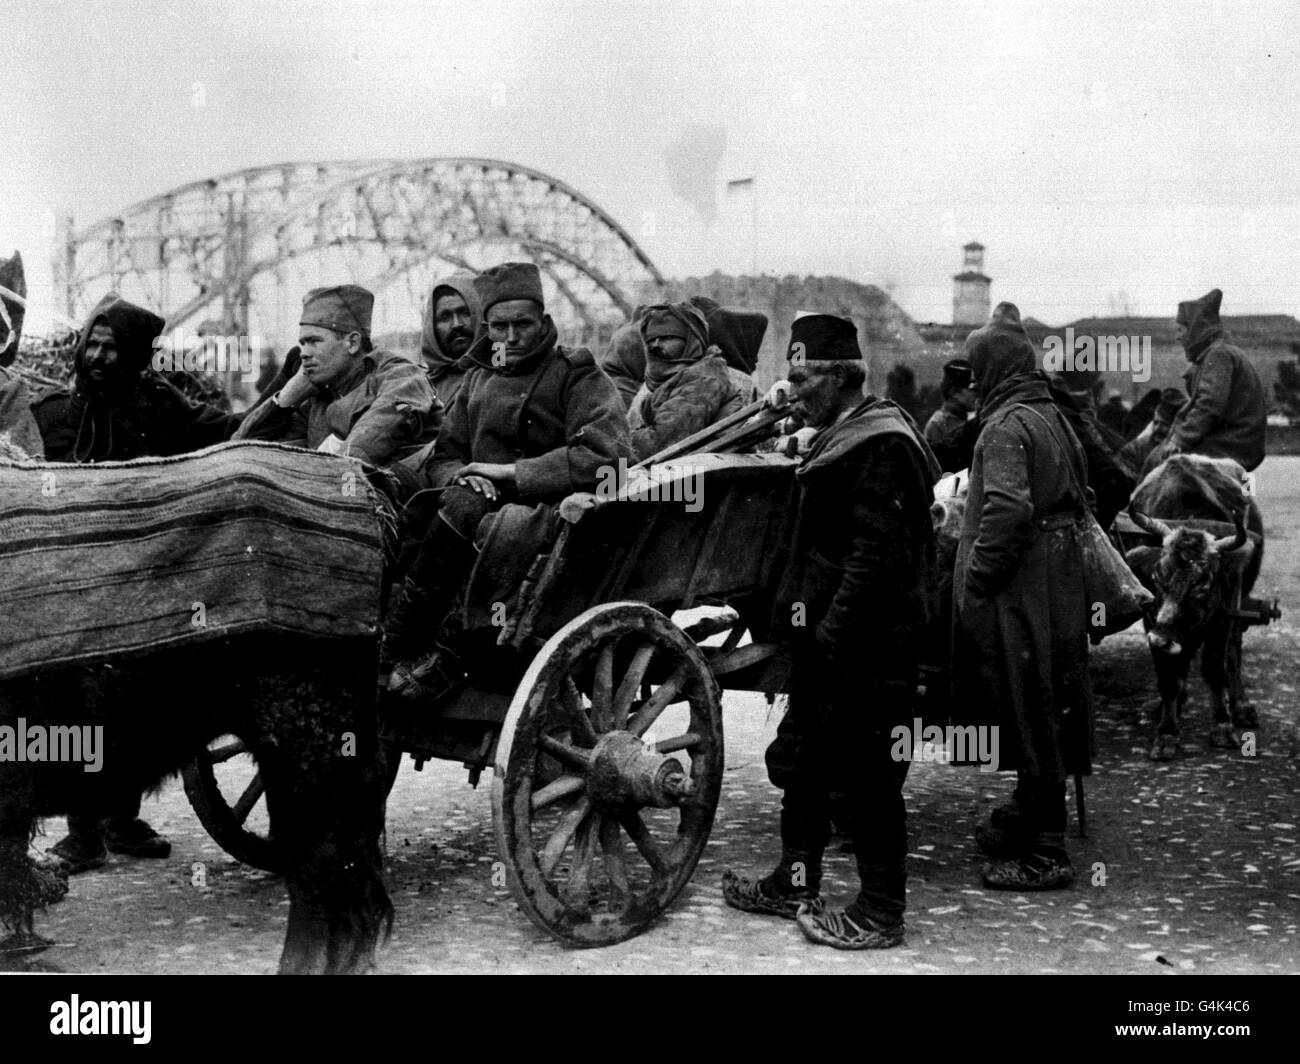 PA NEWS PHOTO CIRCA : 1915 A LIBRARY FILE PICTURE OF SERBIAN TROOPS WOUNDED DURING THE WINTER IN CARTS PULLED BY OXEN DURING THE FIRST WORLD WAR. Stock Photo